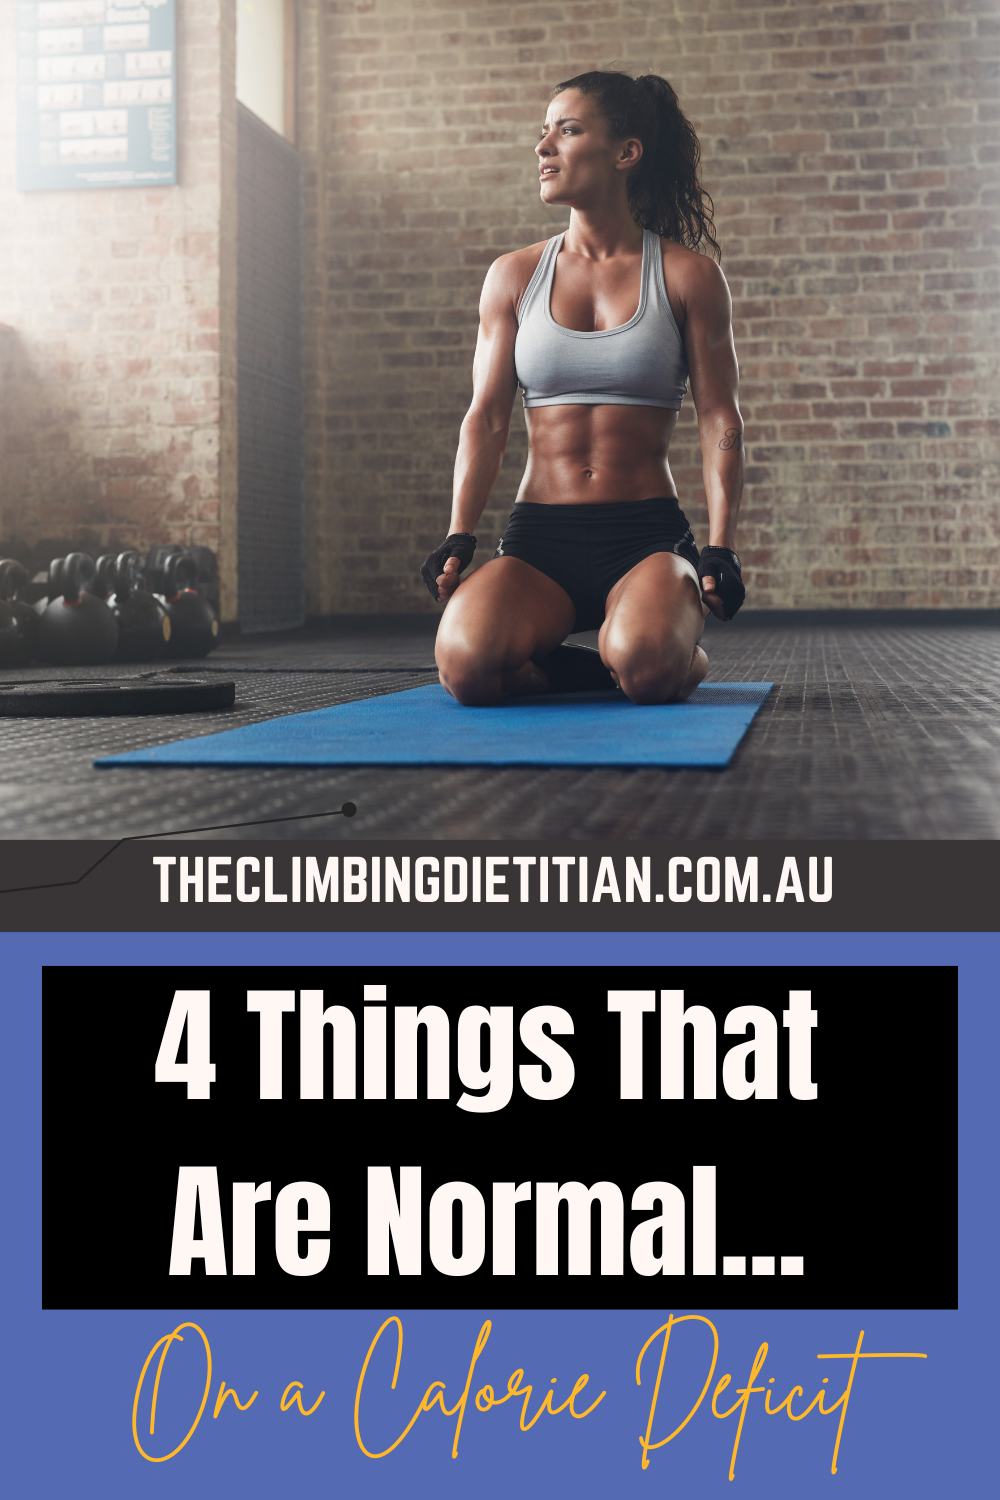 4 Things You Can Expect On A Calorie Deficit  What Is Normal  Fat Loss Strategy- Brisbane Dietitian-Sports Dietitian-Nutritionist